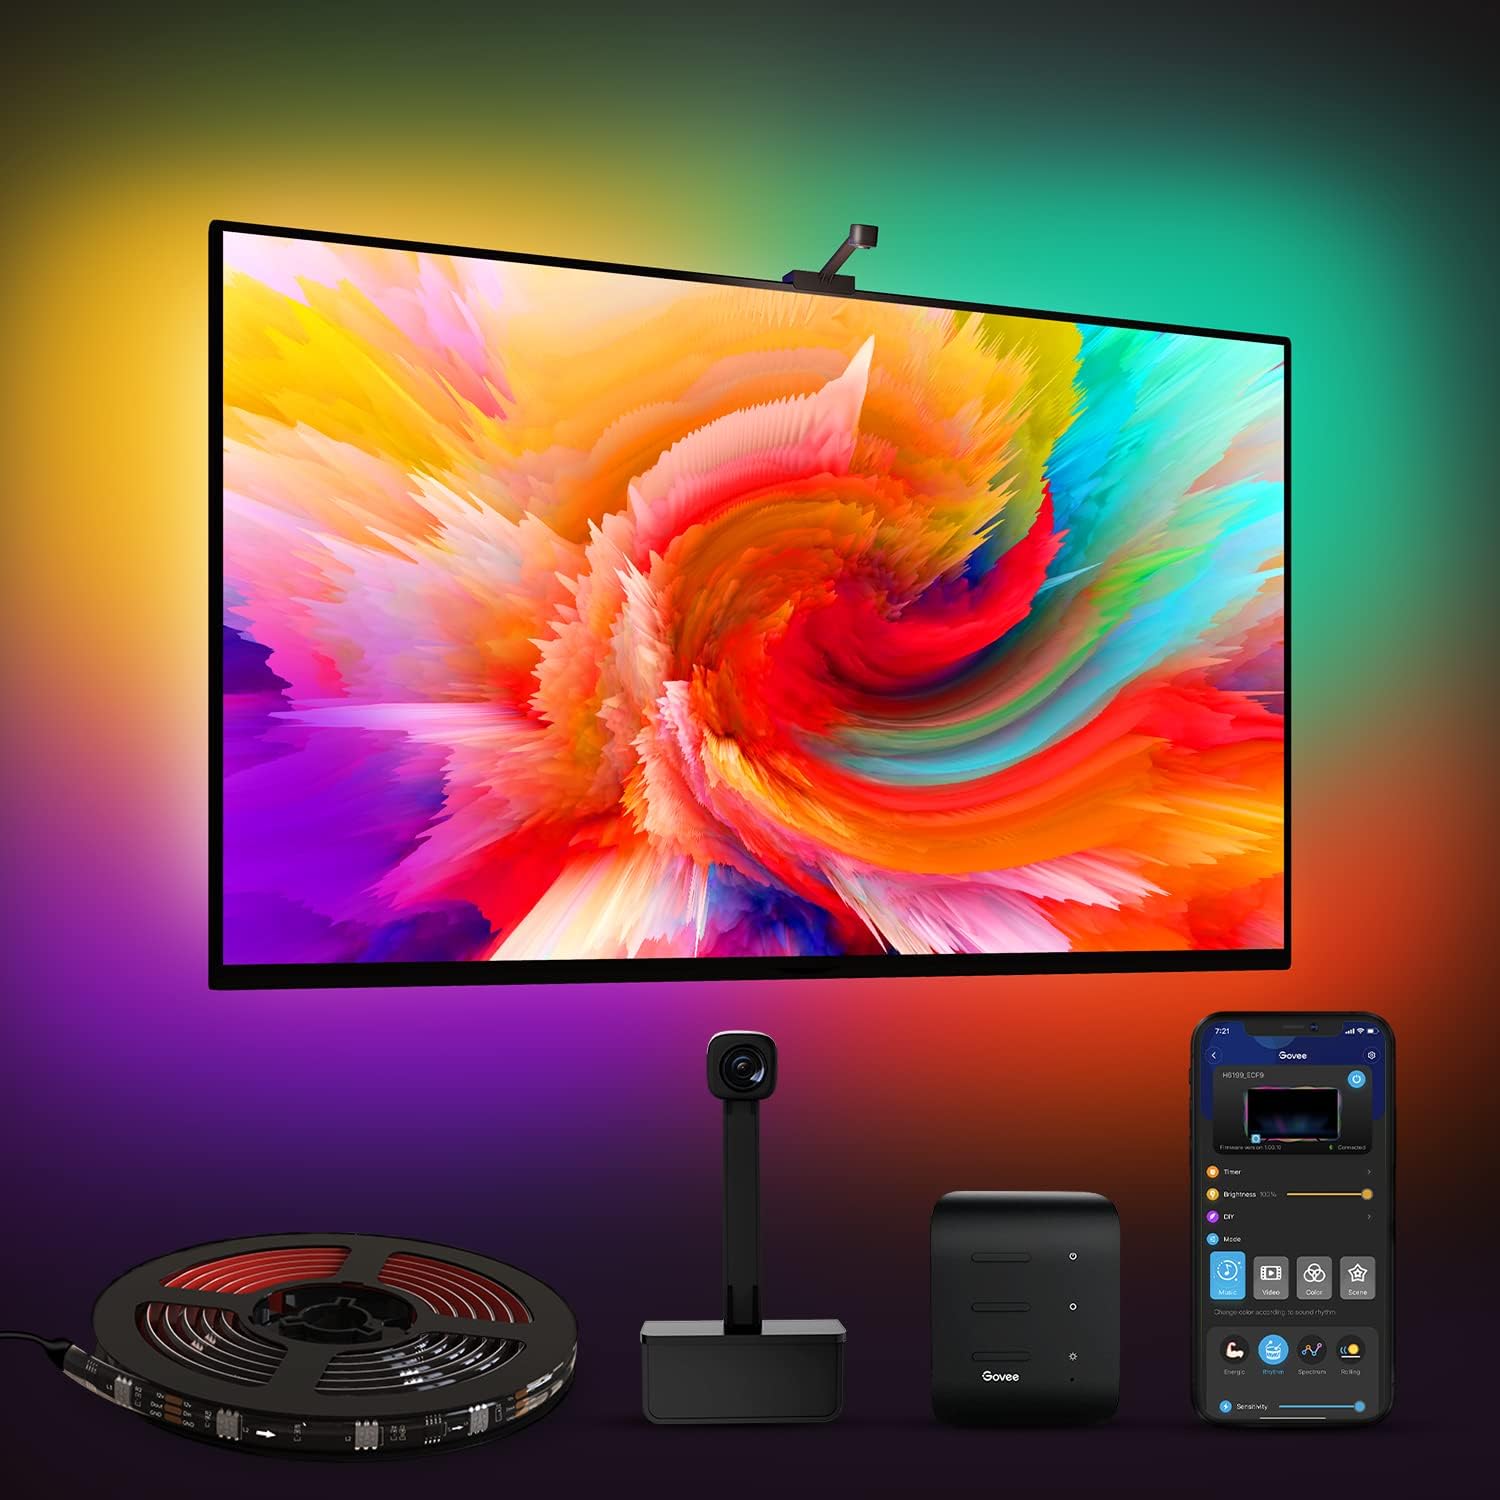 Enhance Your TV Experience with Govee Envisual LED Backlights | 75-85 inch TVs, WiFi, Alexa & Google Assistant Compatible  Elevate Your Entertainment with Govee Envisual LED Backlights | 16.4ft RGBIC WiFi DreamView T1 TV Backlights